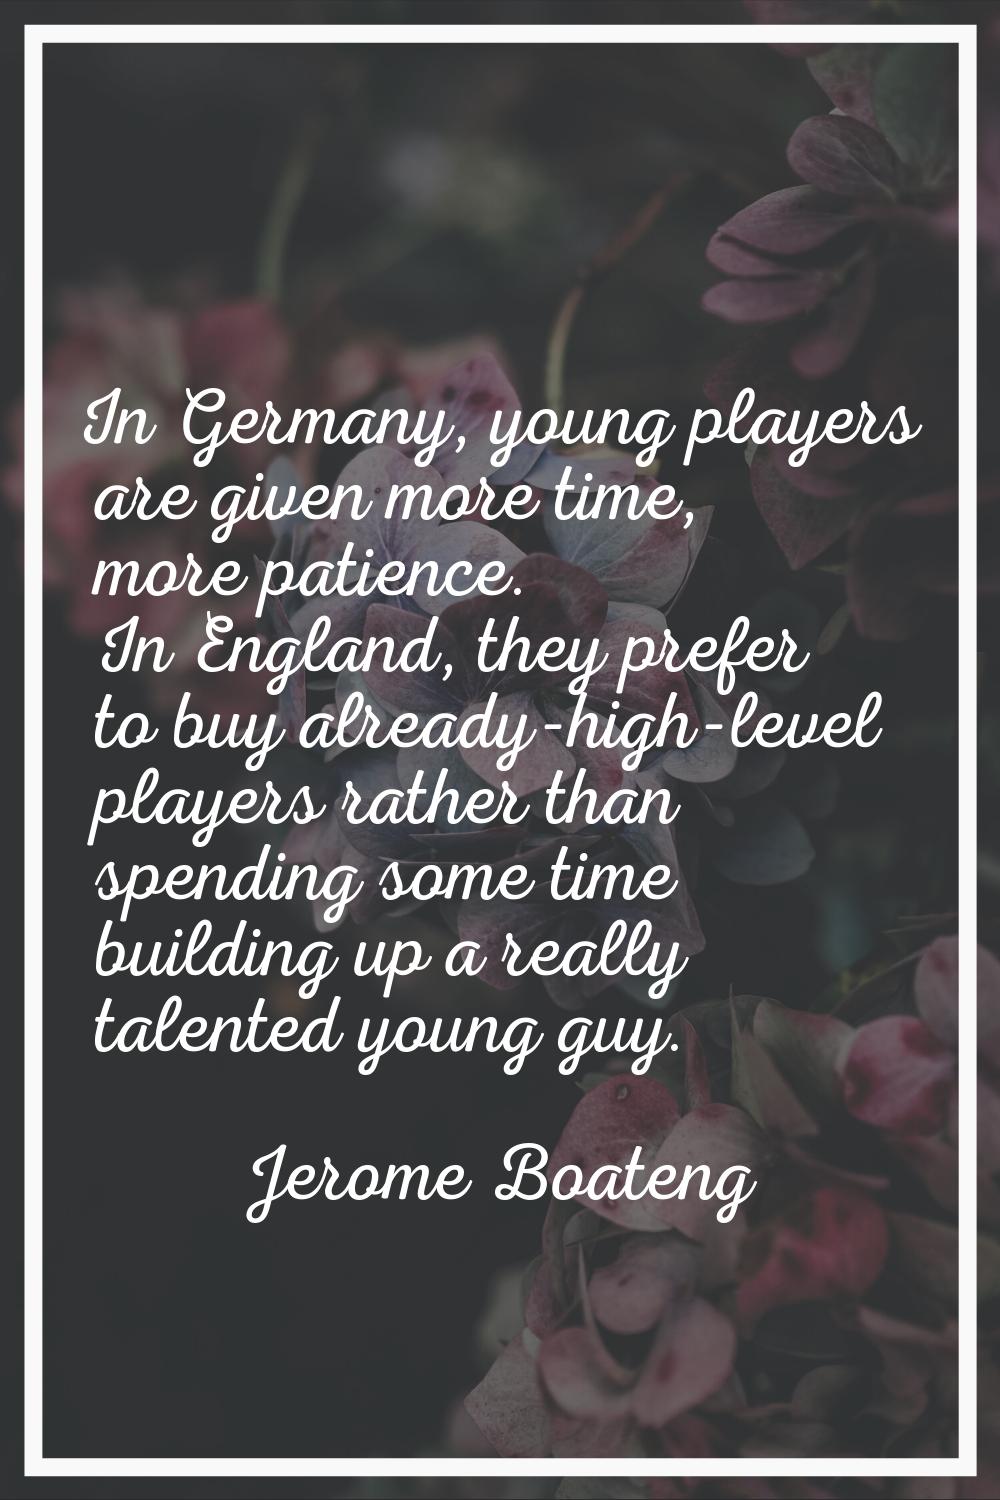 In Germany, young players are given more time, more patience. In England, they prefer to buy alread